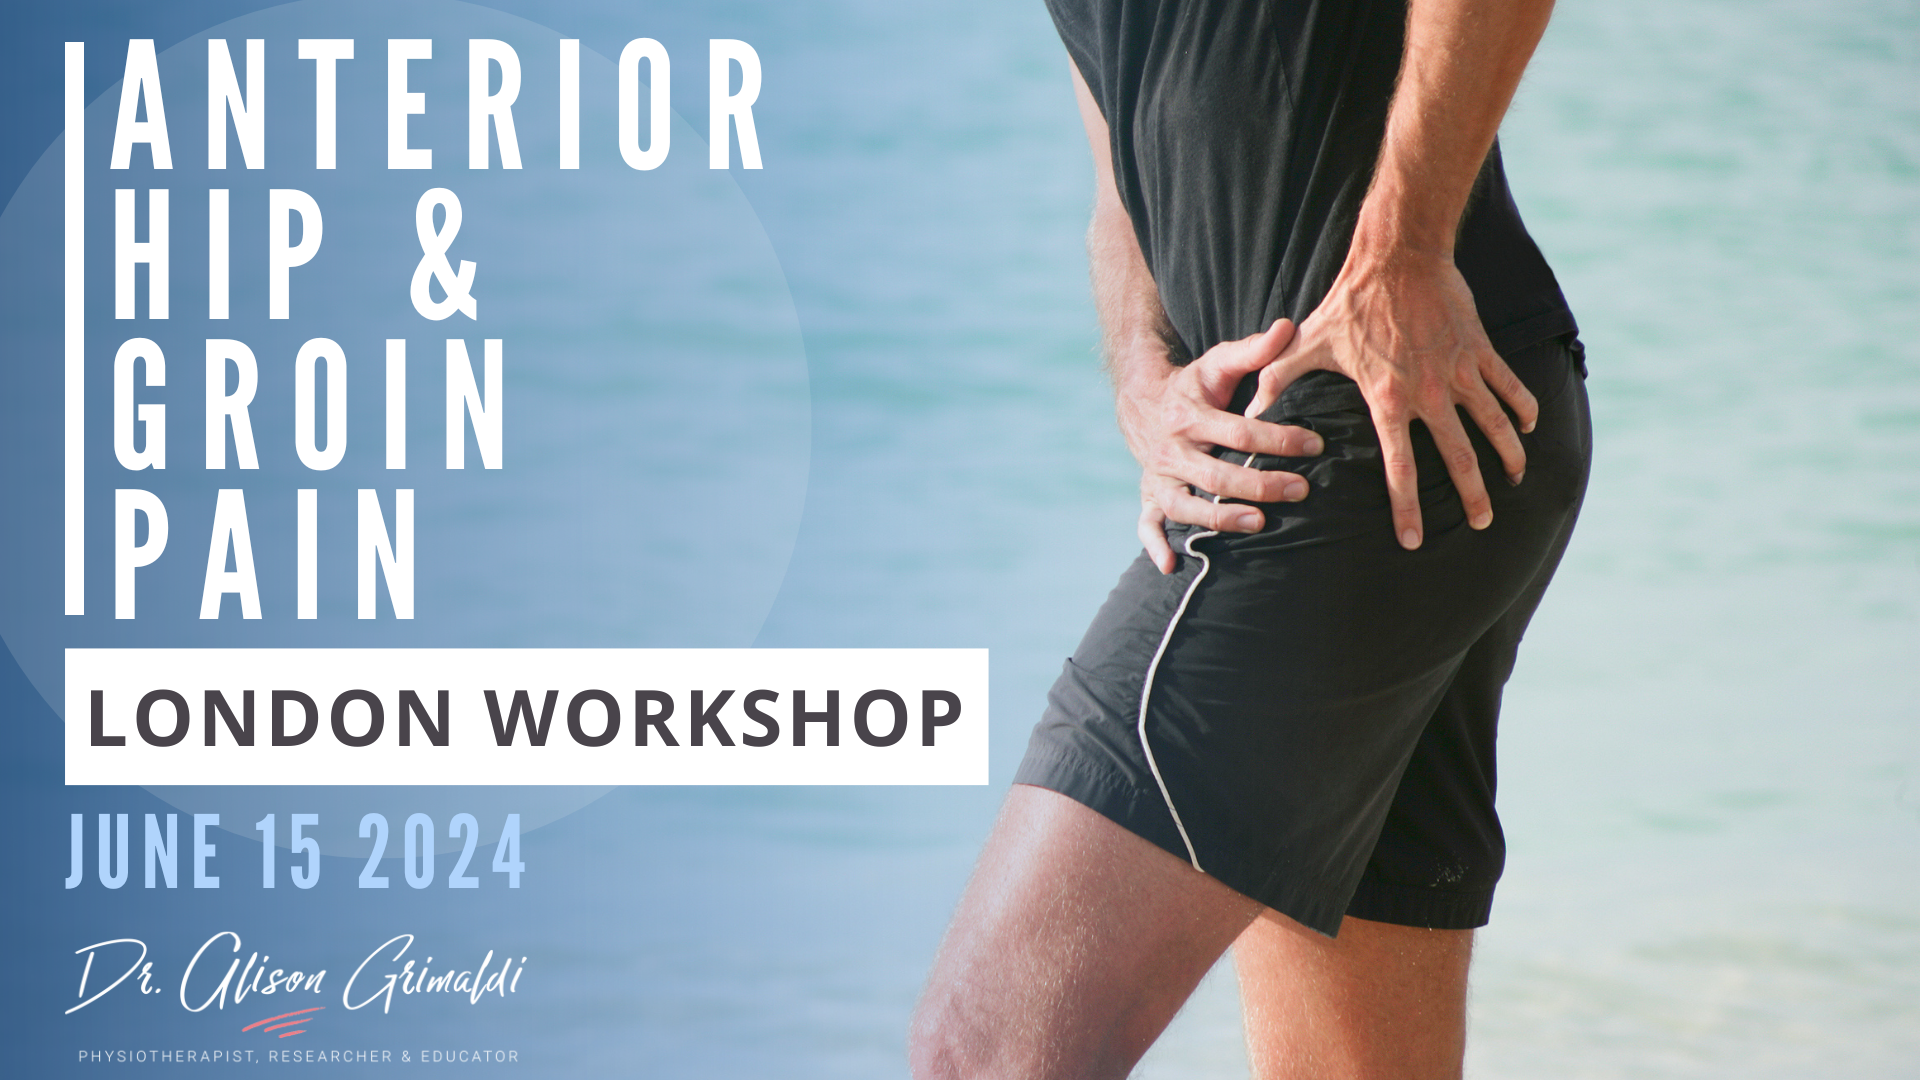 Anterior-Hip-and-Groin-Pain-Workshop-1-London-2024